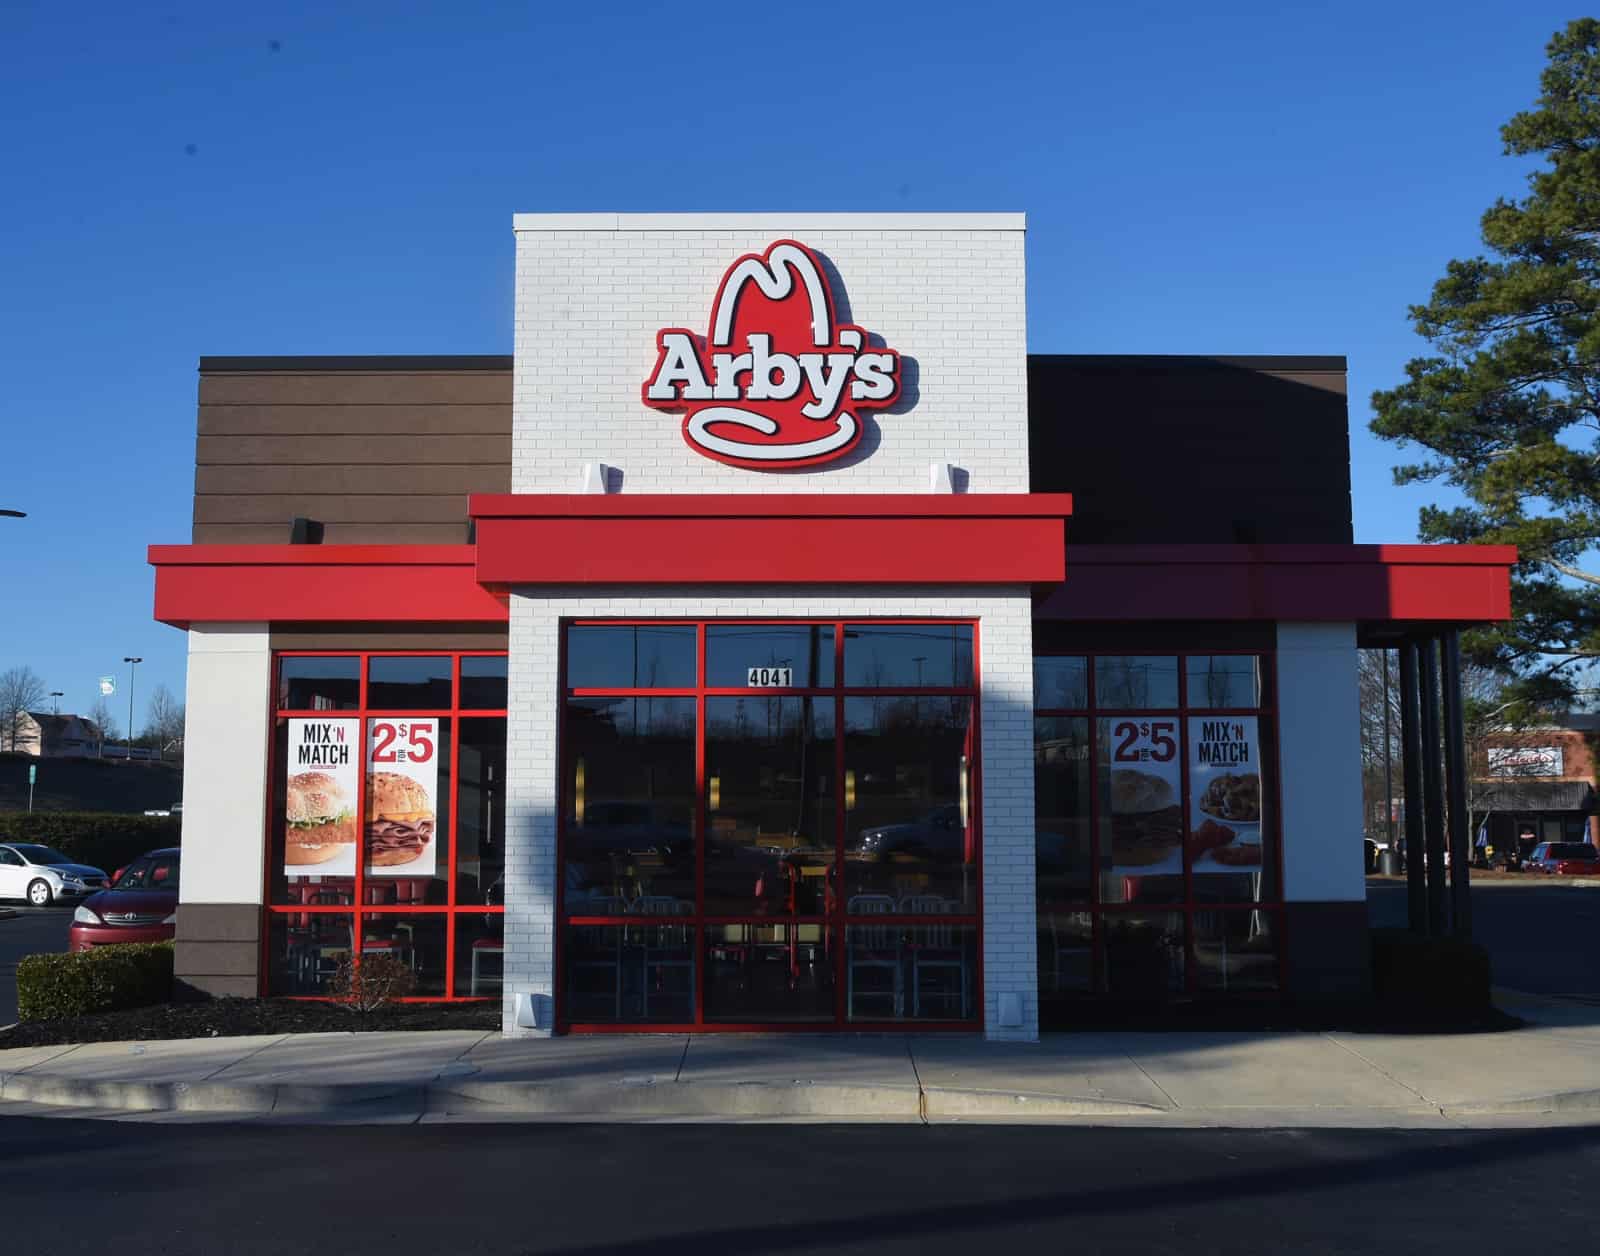 Largest Fast Food Chain Arby’s Plans to Enter the Metaverse